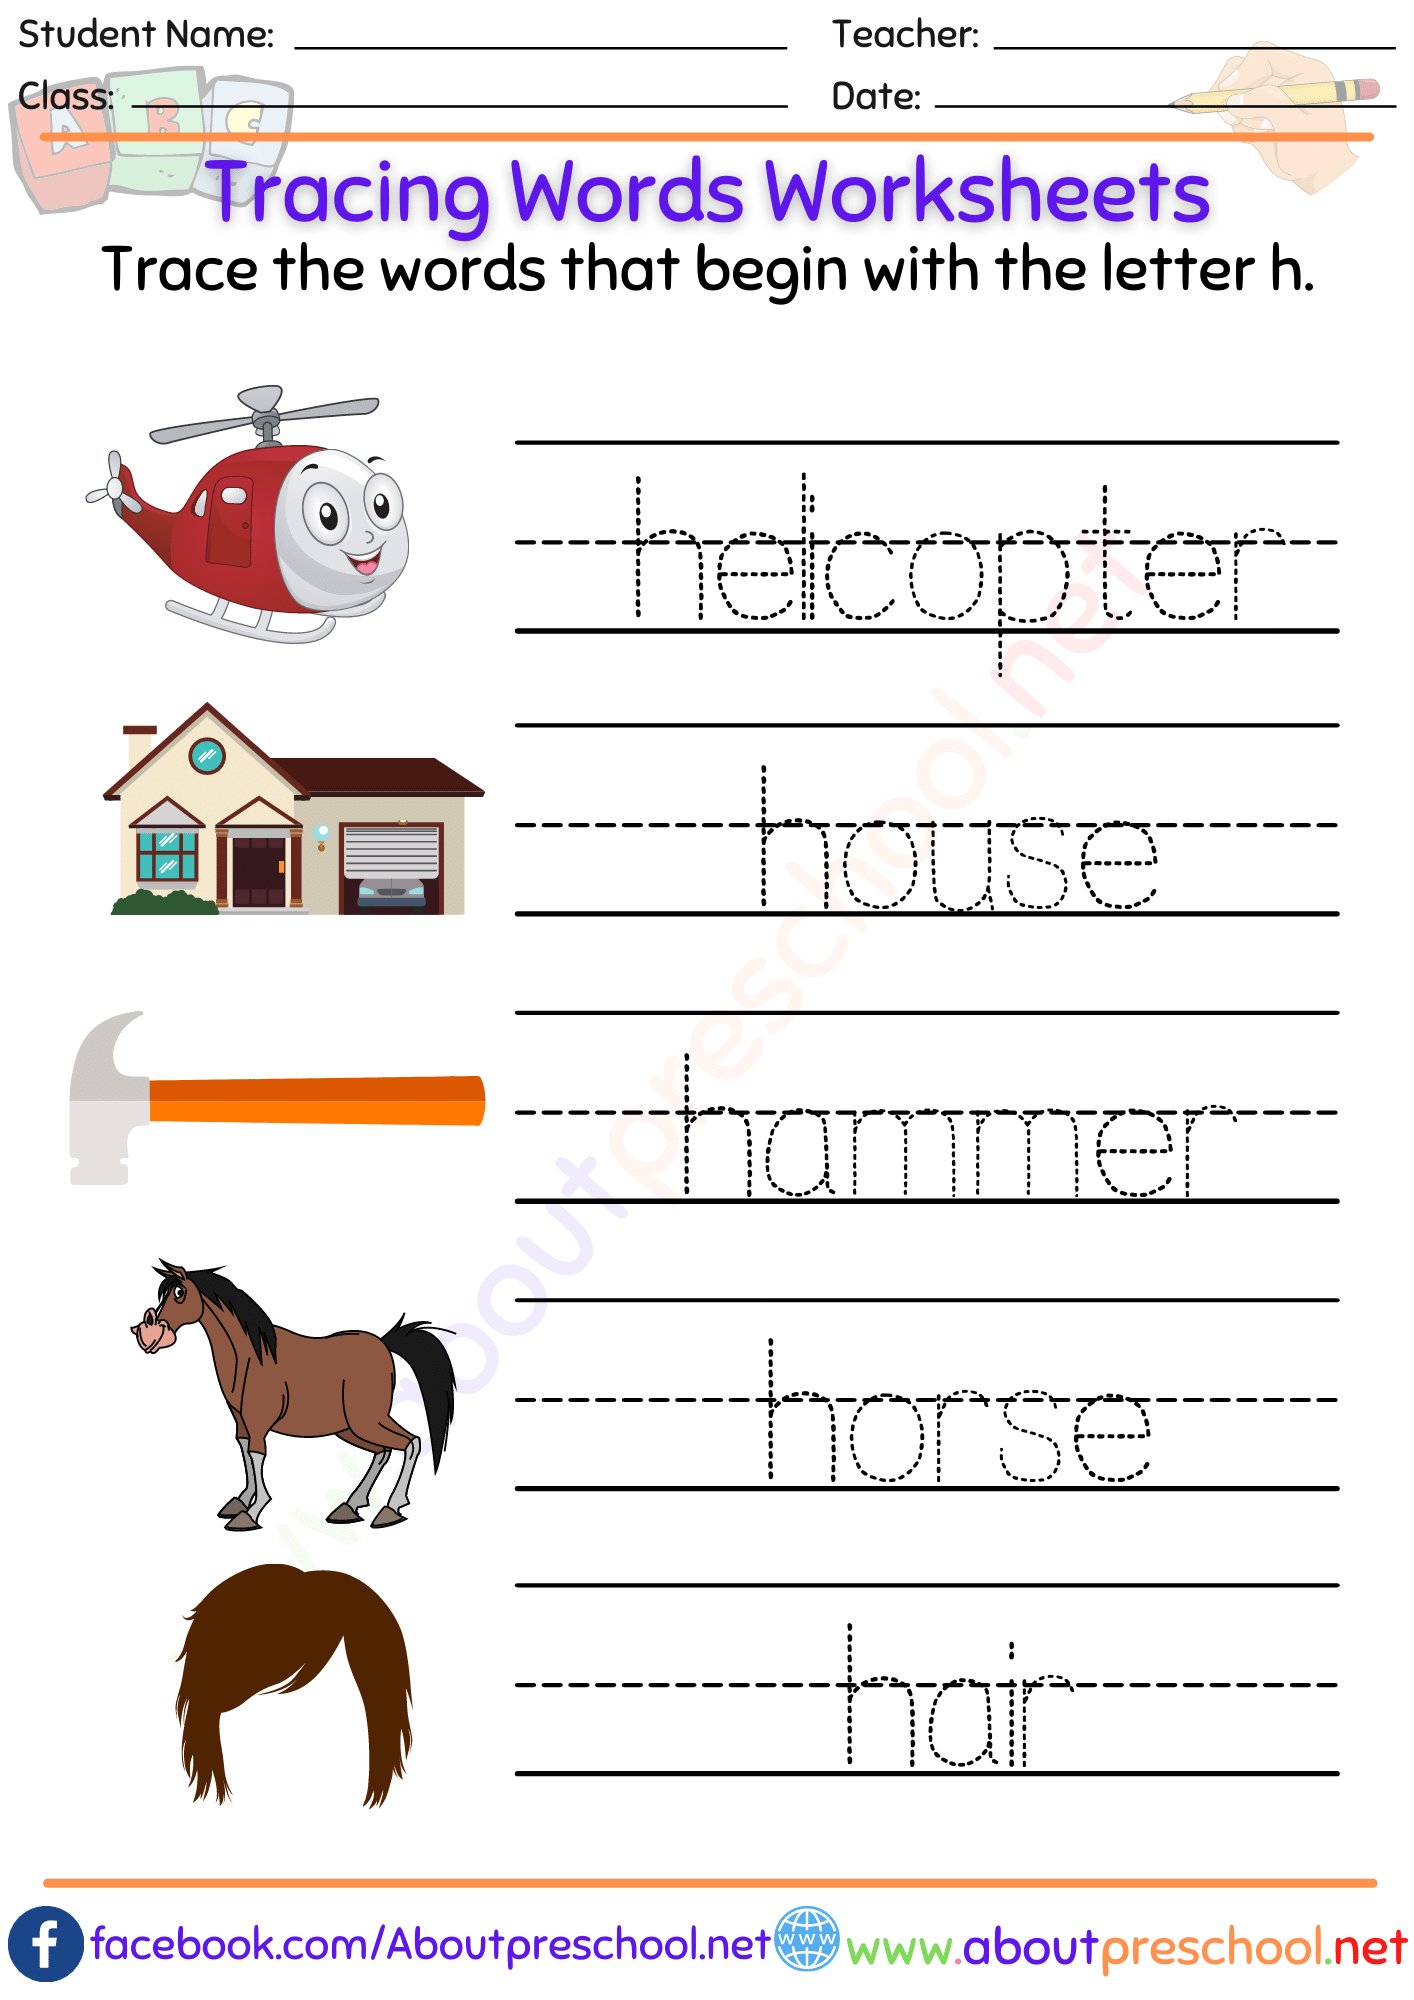 Tracing Words Worksheets-h